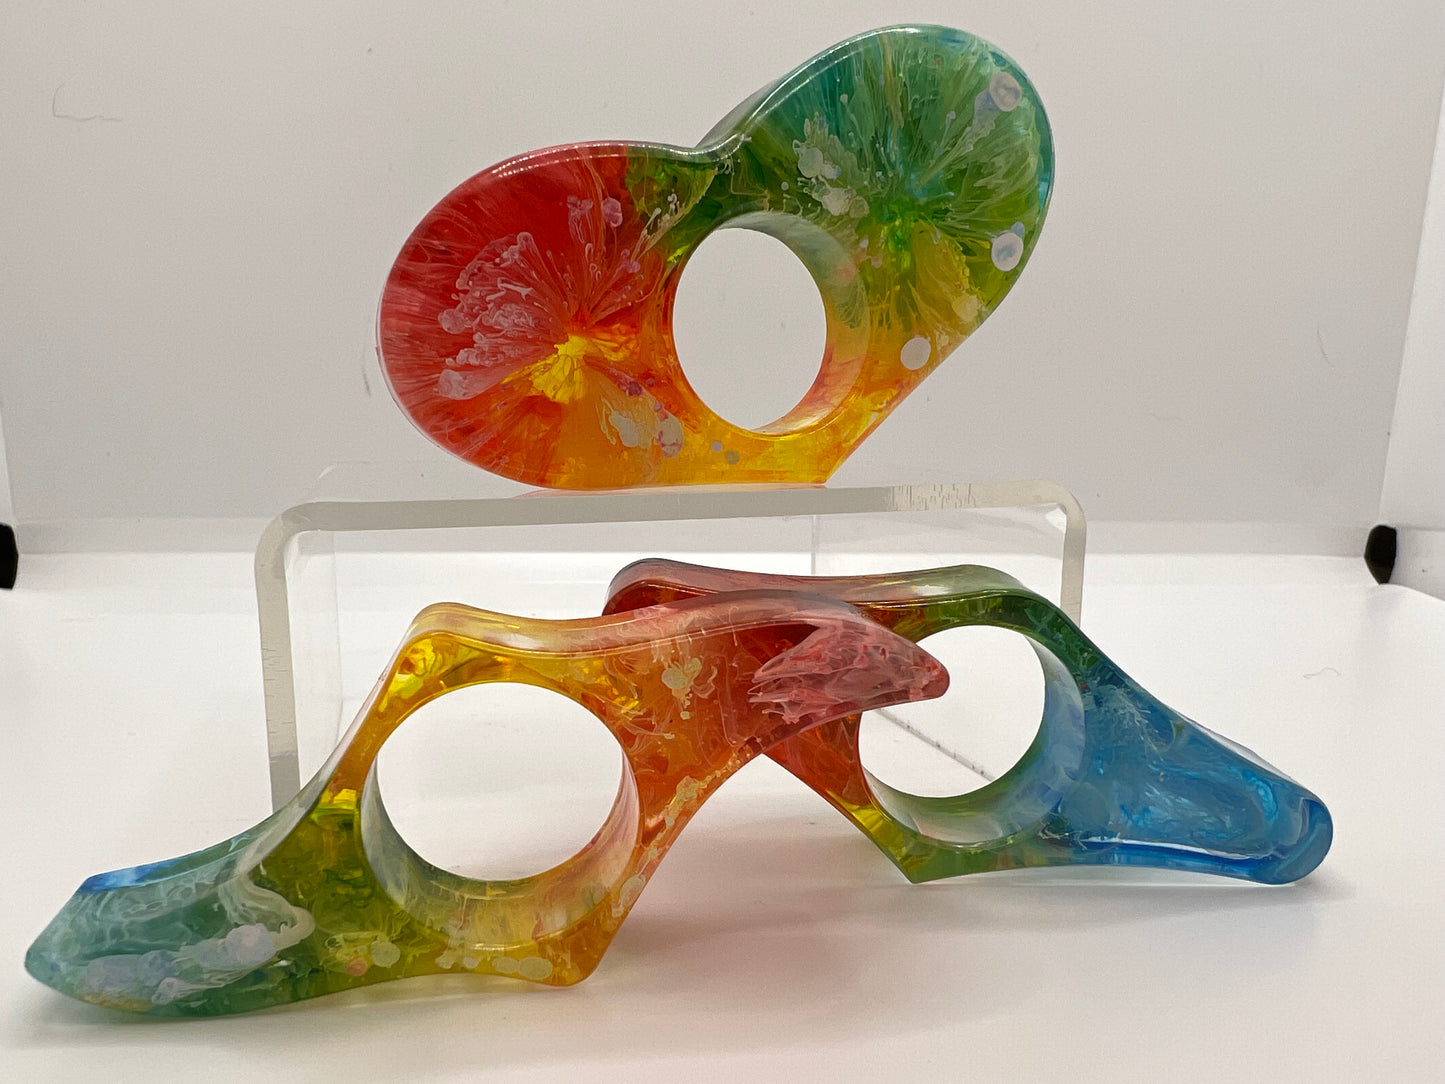 three book page holders on a white background. one is the shape of a heart sitting on a clear acrylic riser and there are two in front of the riser. each book page holder is rainbow in red, orange, yellow, green, and blue with white swirls.